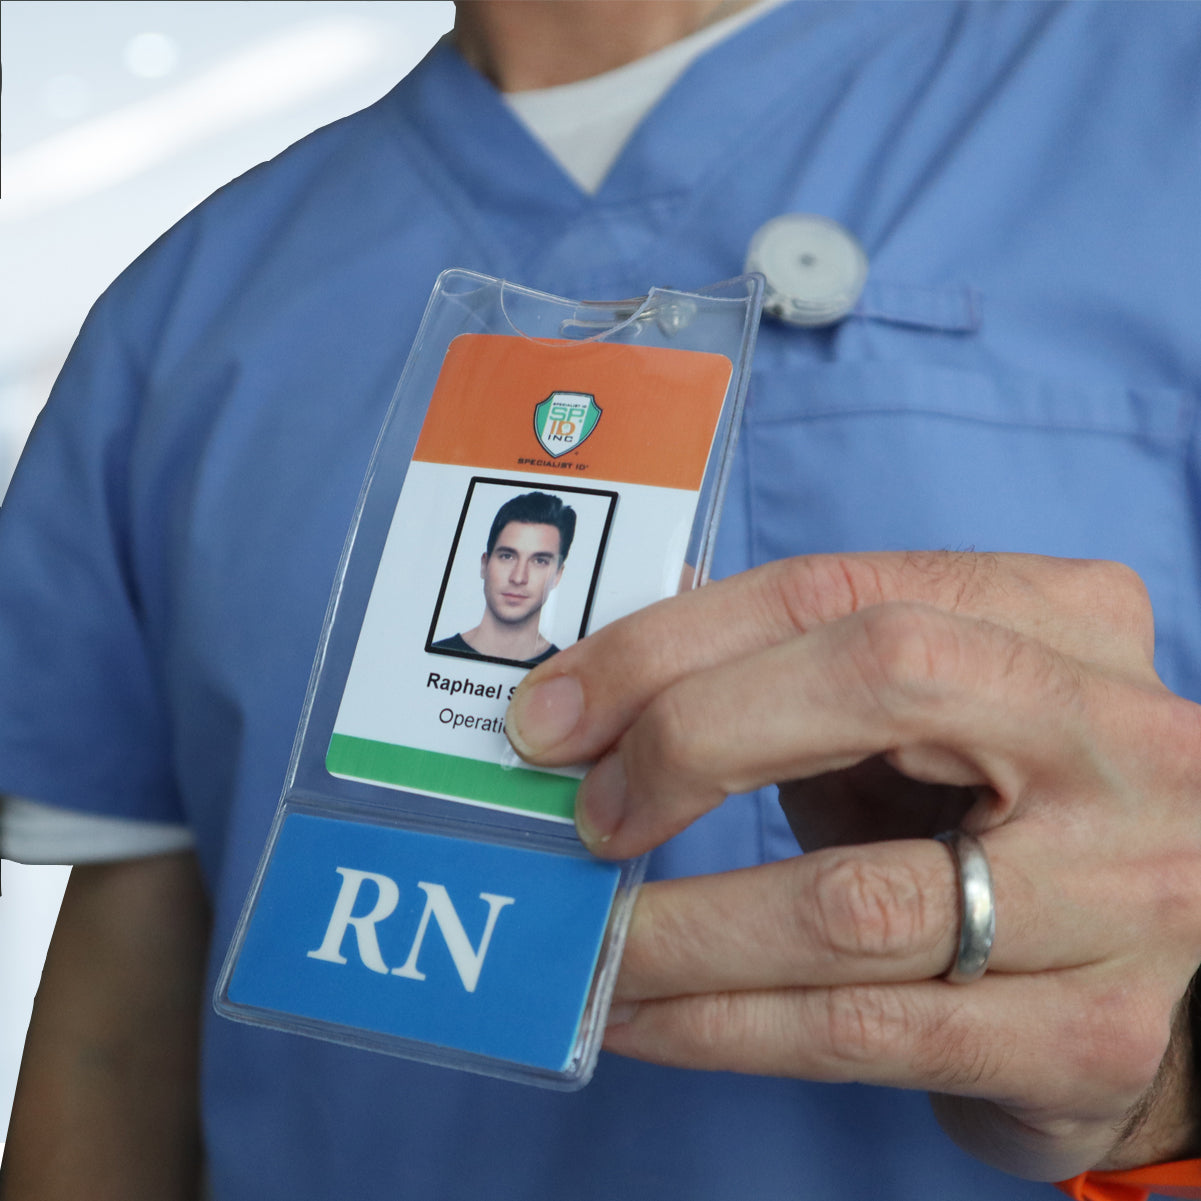 RN BadgeBottom ID Card and RN Badge Buddy all in one for healthcare professionals